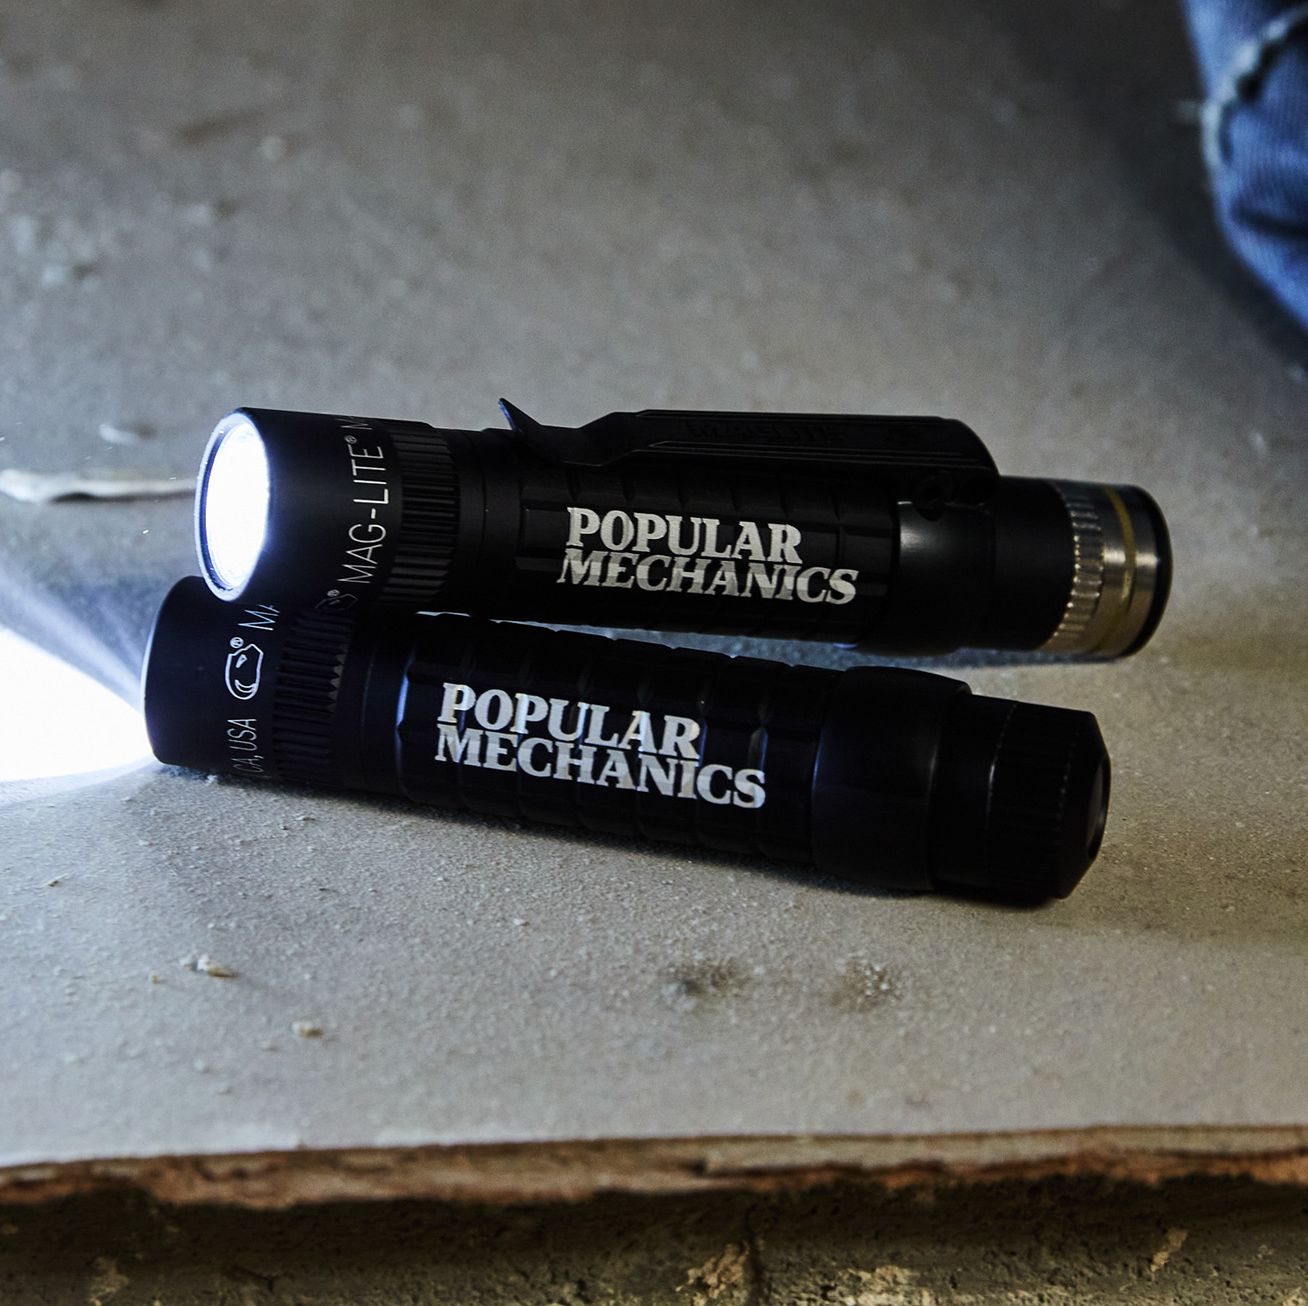 A Tale of Two Maglites: One of These Tactical Flashlights Is Right for You